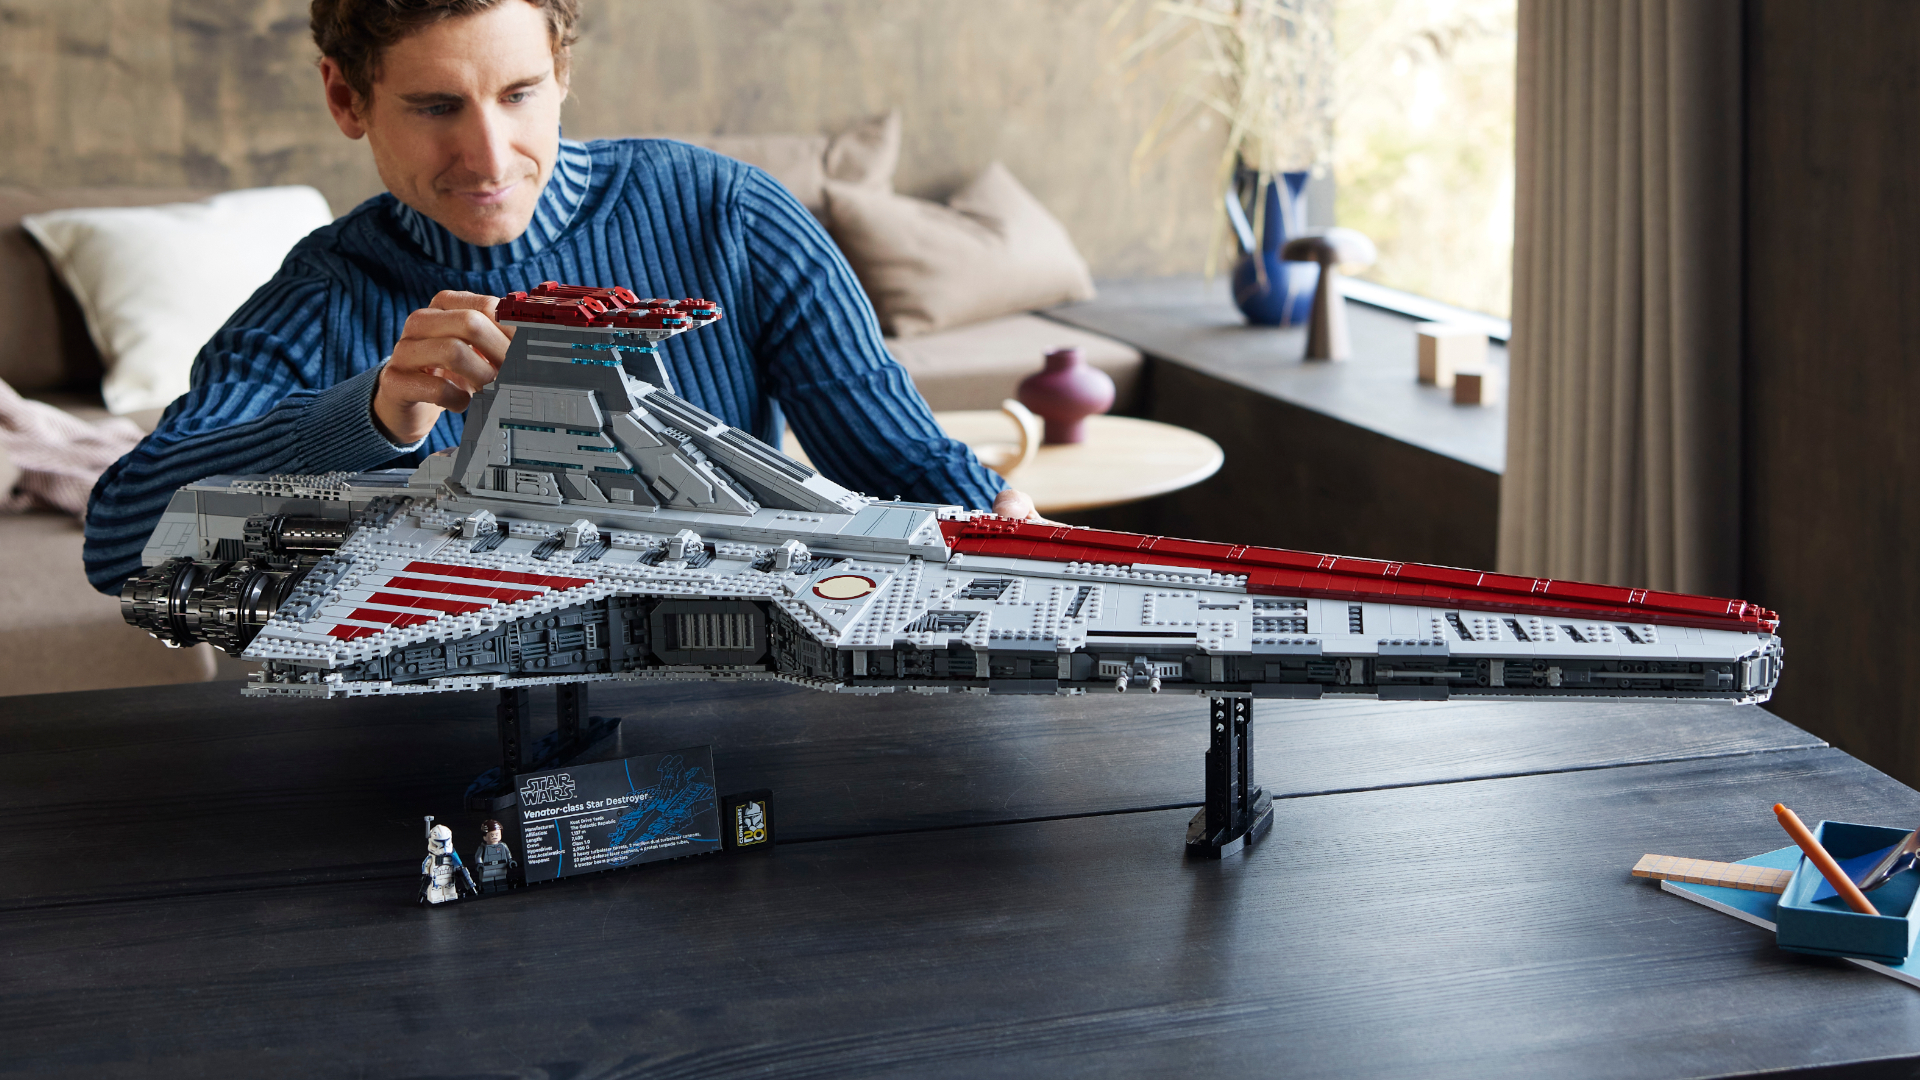 New Venator is one of the biggest Lego Star Wars kits to date GamesRadar+